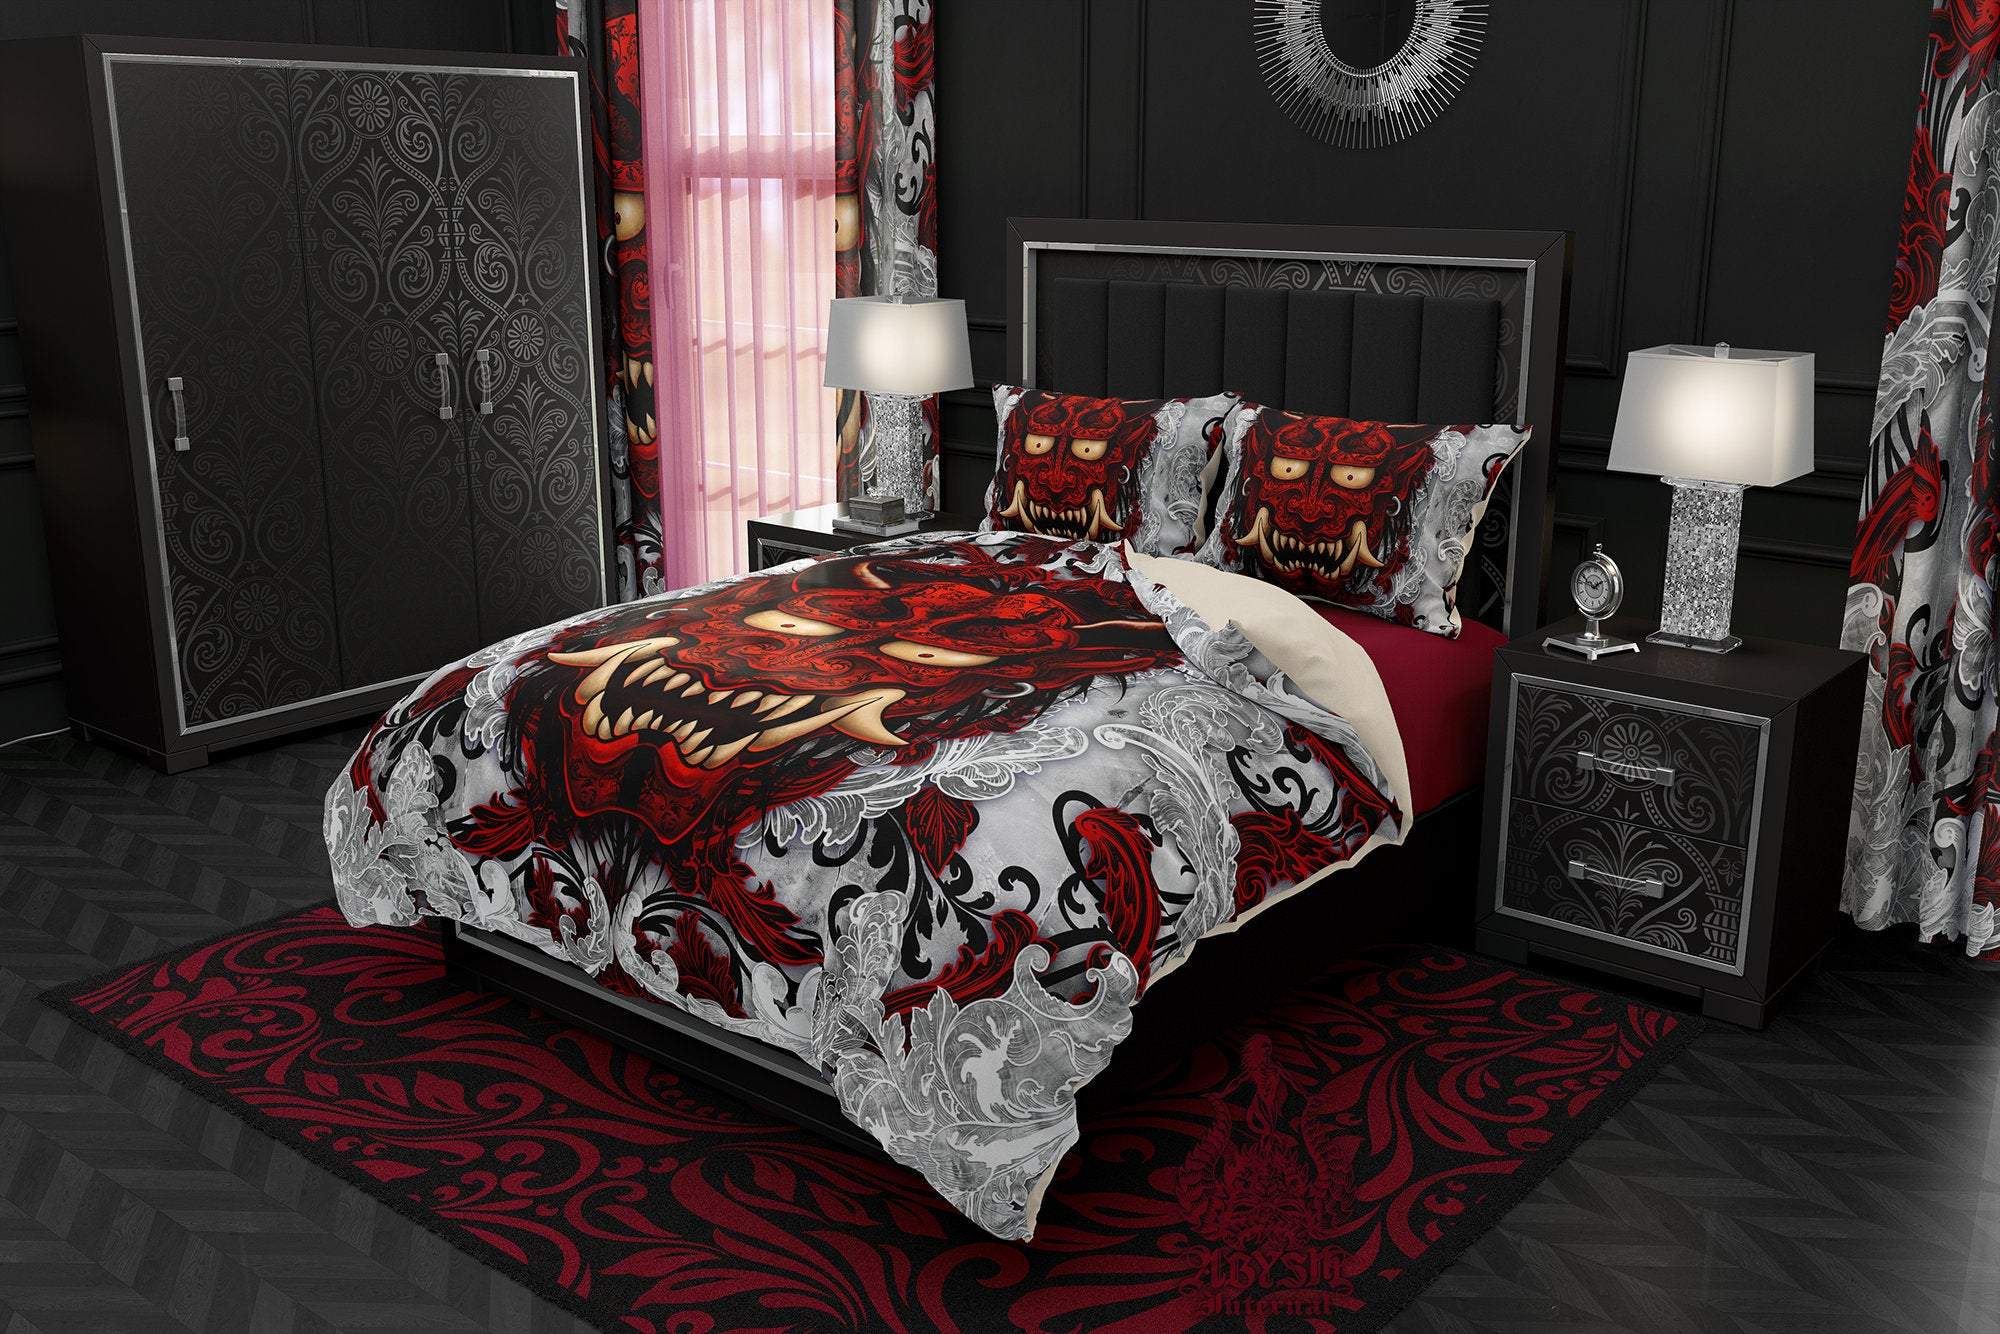 Oni Bedding Set, Comforter and Duvet, Gamer Anime Bed Cover and Bedroom Decor, King, Queen and Twin Size - Bloody, Japanese Demon - Abysm Internal